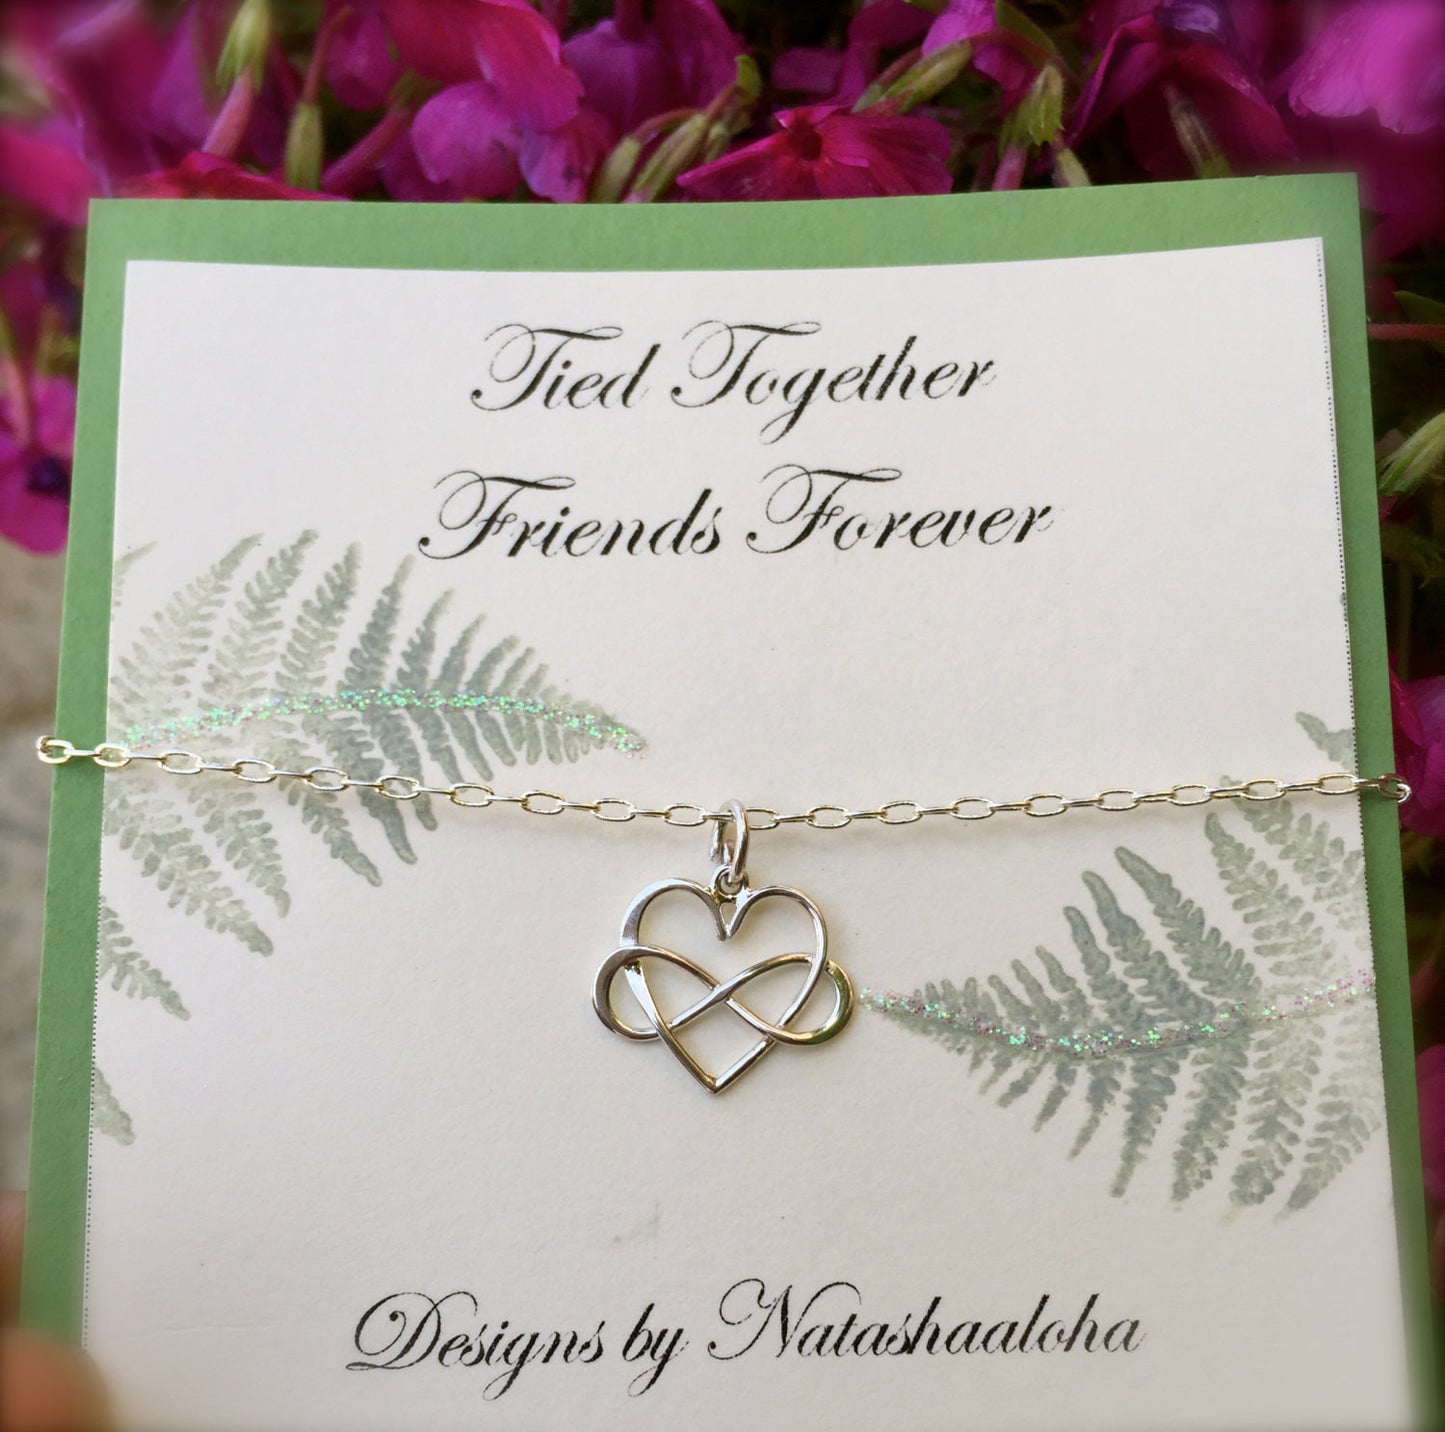 Mom Necklace,  Mother Daughter Jewerly, Heart Infinity Necklace, Tied Together Forever Friends,Bridesmaid Necklace, natashaaloh - Natashaaloha, jewelry, bracelets, necklace, keychains, fishing lures, gifts for men, charms, personalized, 